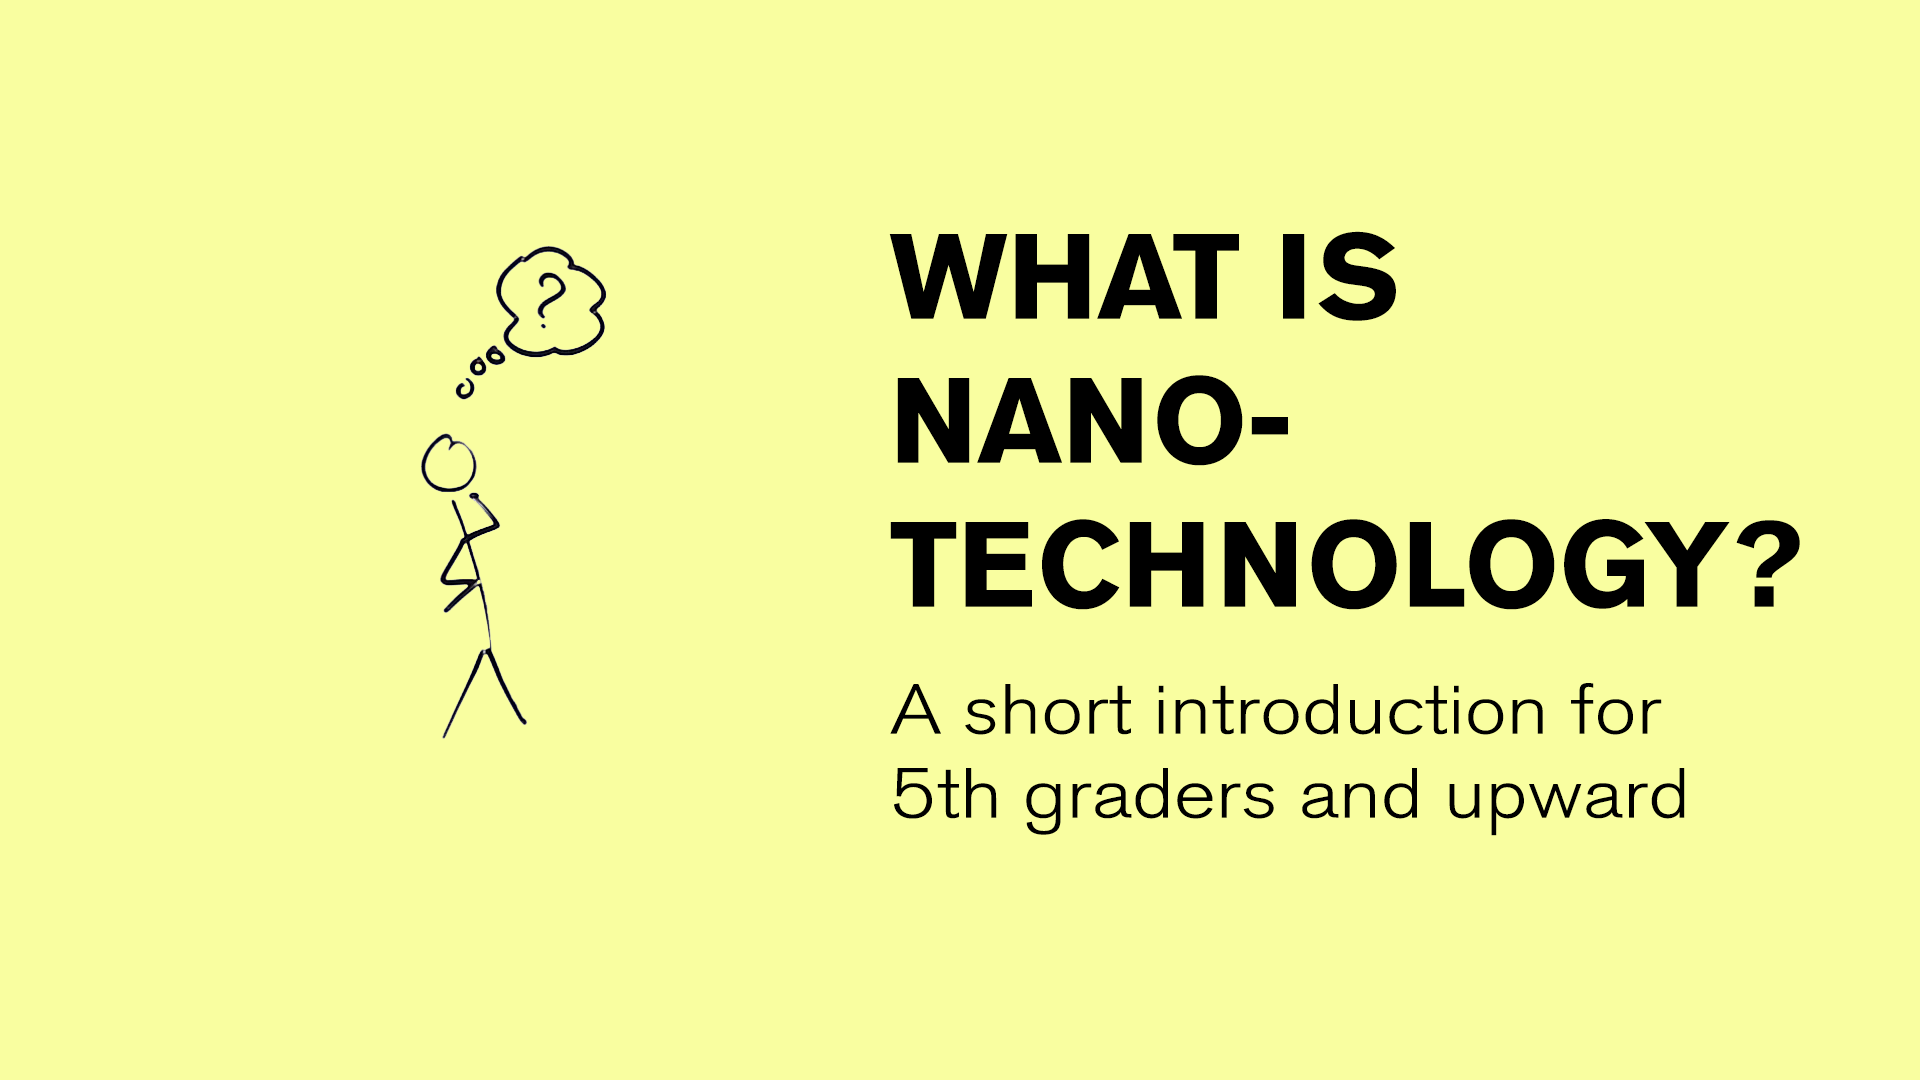 A fifth grader (and up) introduction to nanotechnology